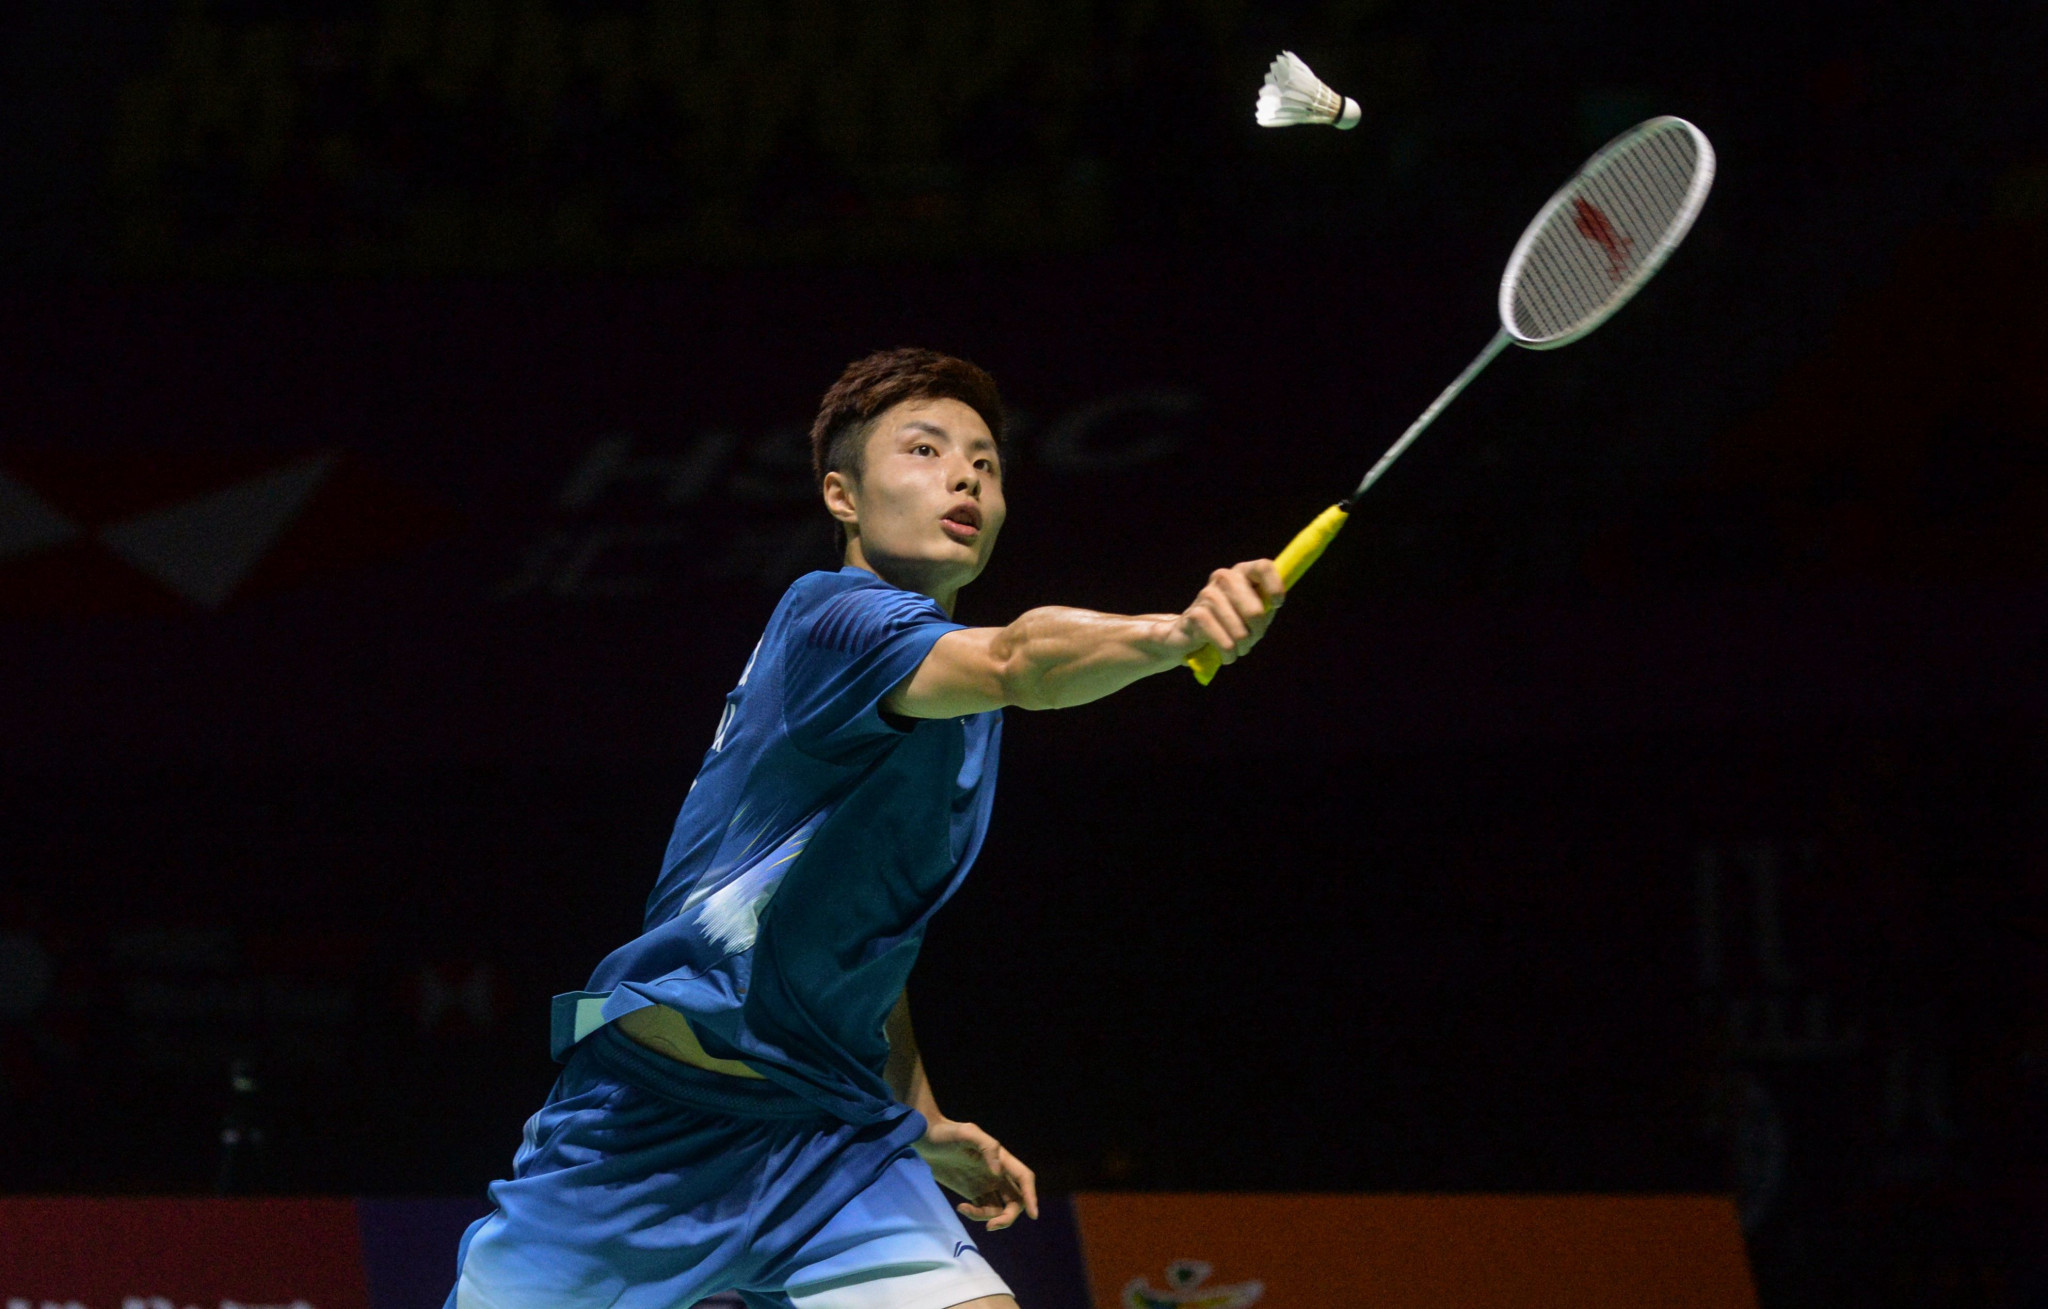 China's second seed Shi Yuqi was forced to concede his first round match at the BWF Hong Kong Open to local favourite Lee Cheuk Yiu because of injury ©Getty Images